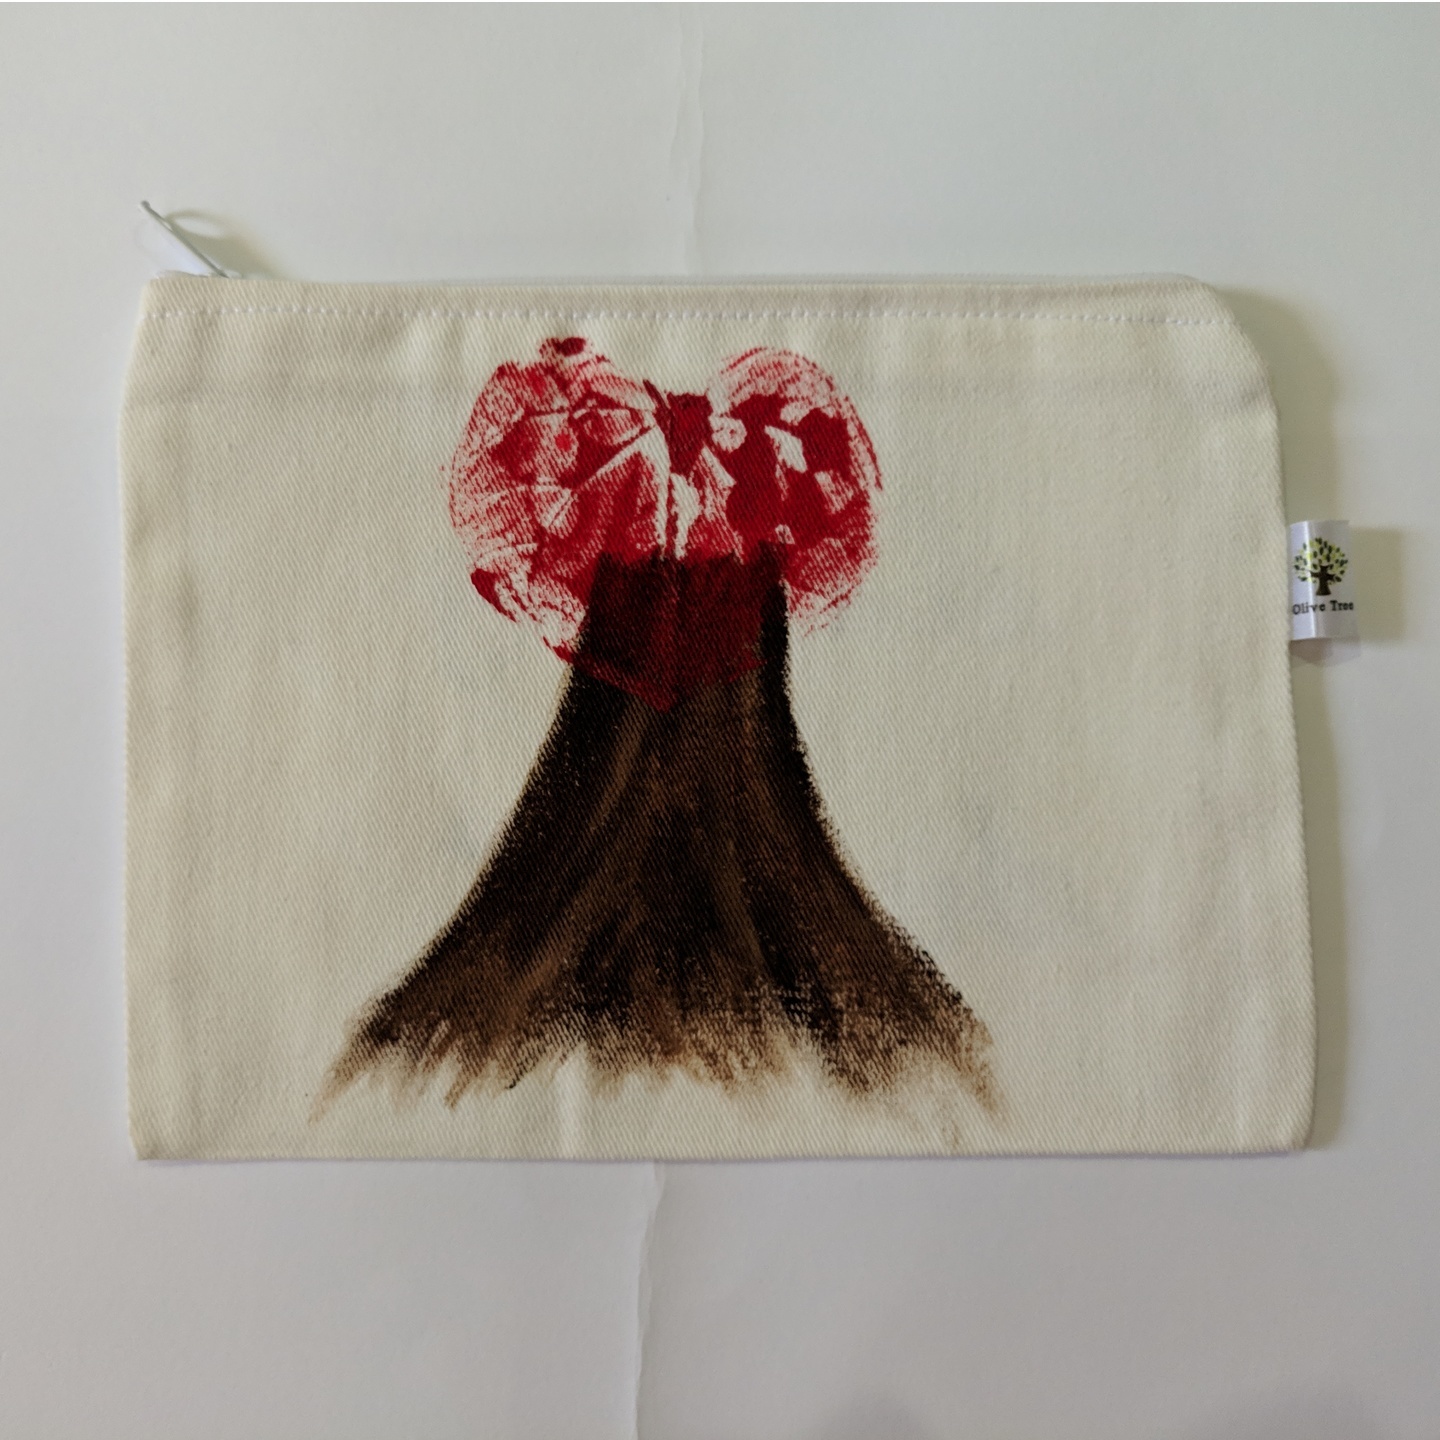 Gladiolus Zipper Pouch M, Strong Support Volcano